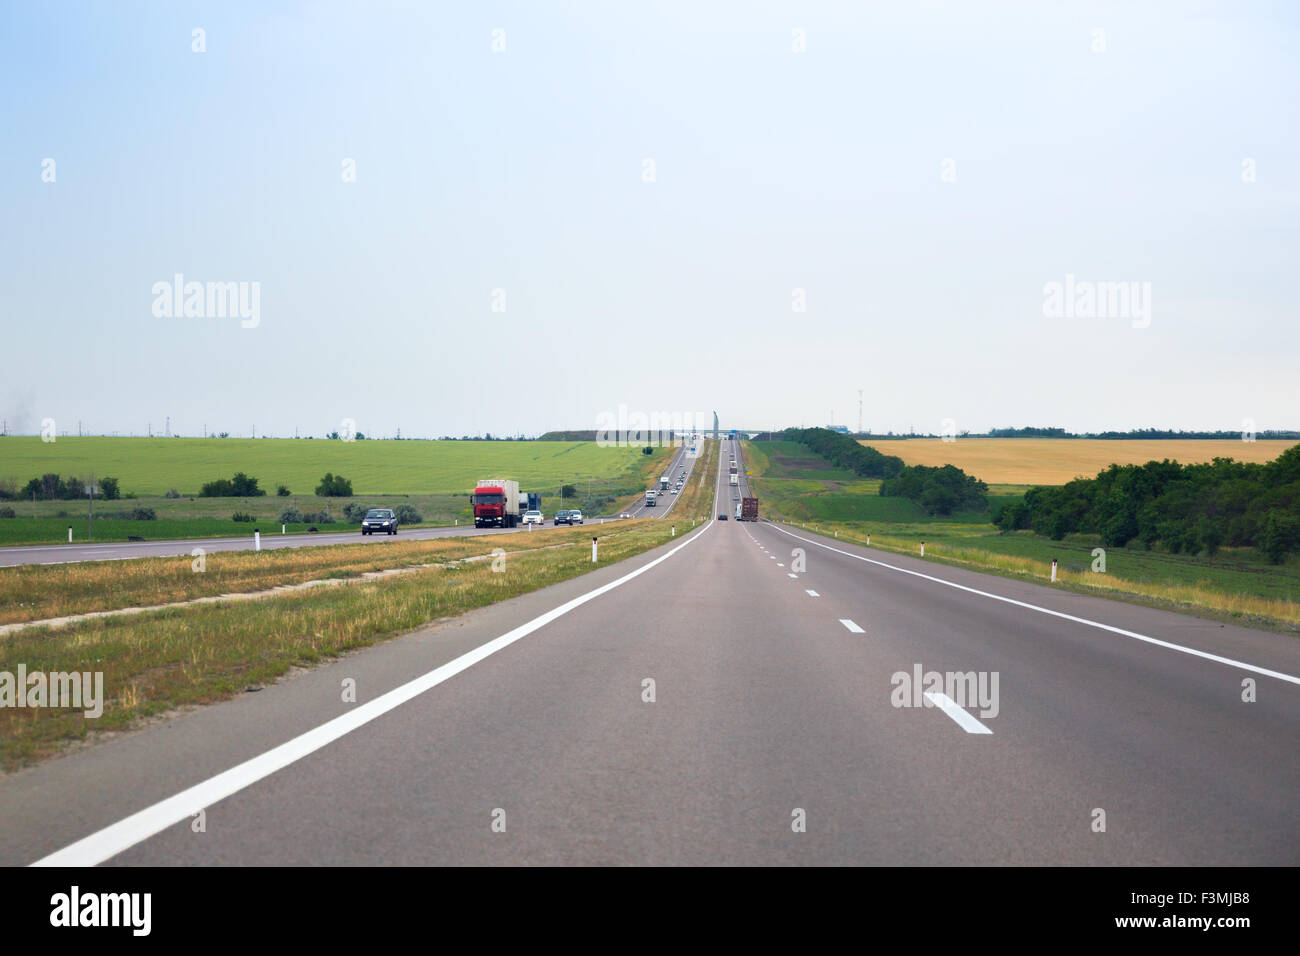 Intercity highway with traffic in Russia Stock Photo